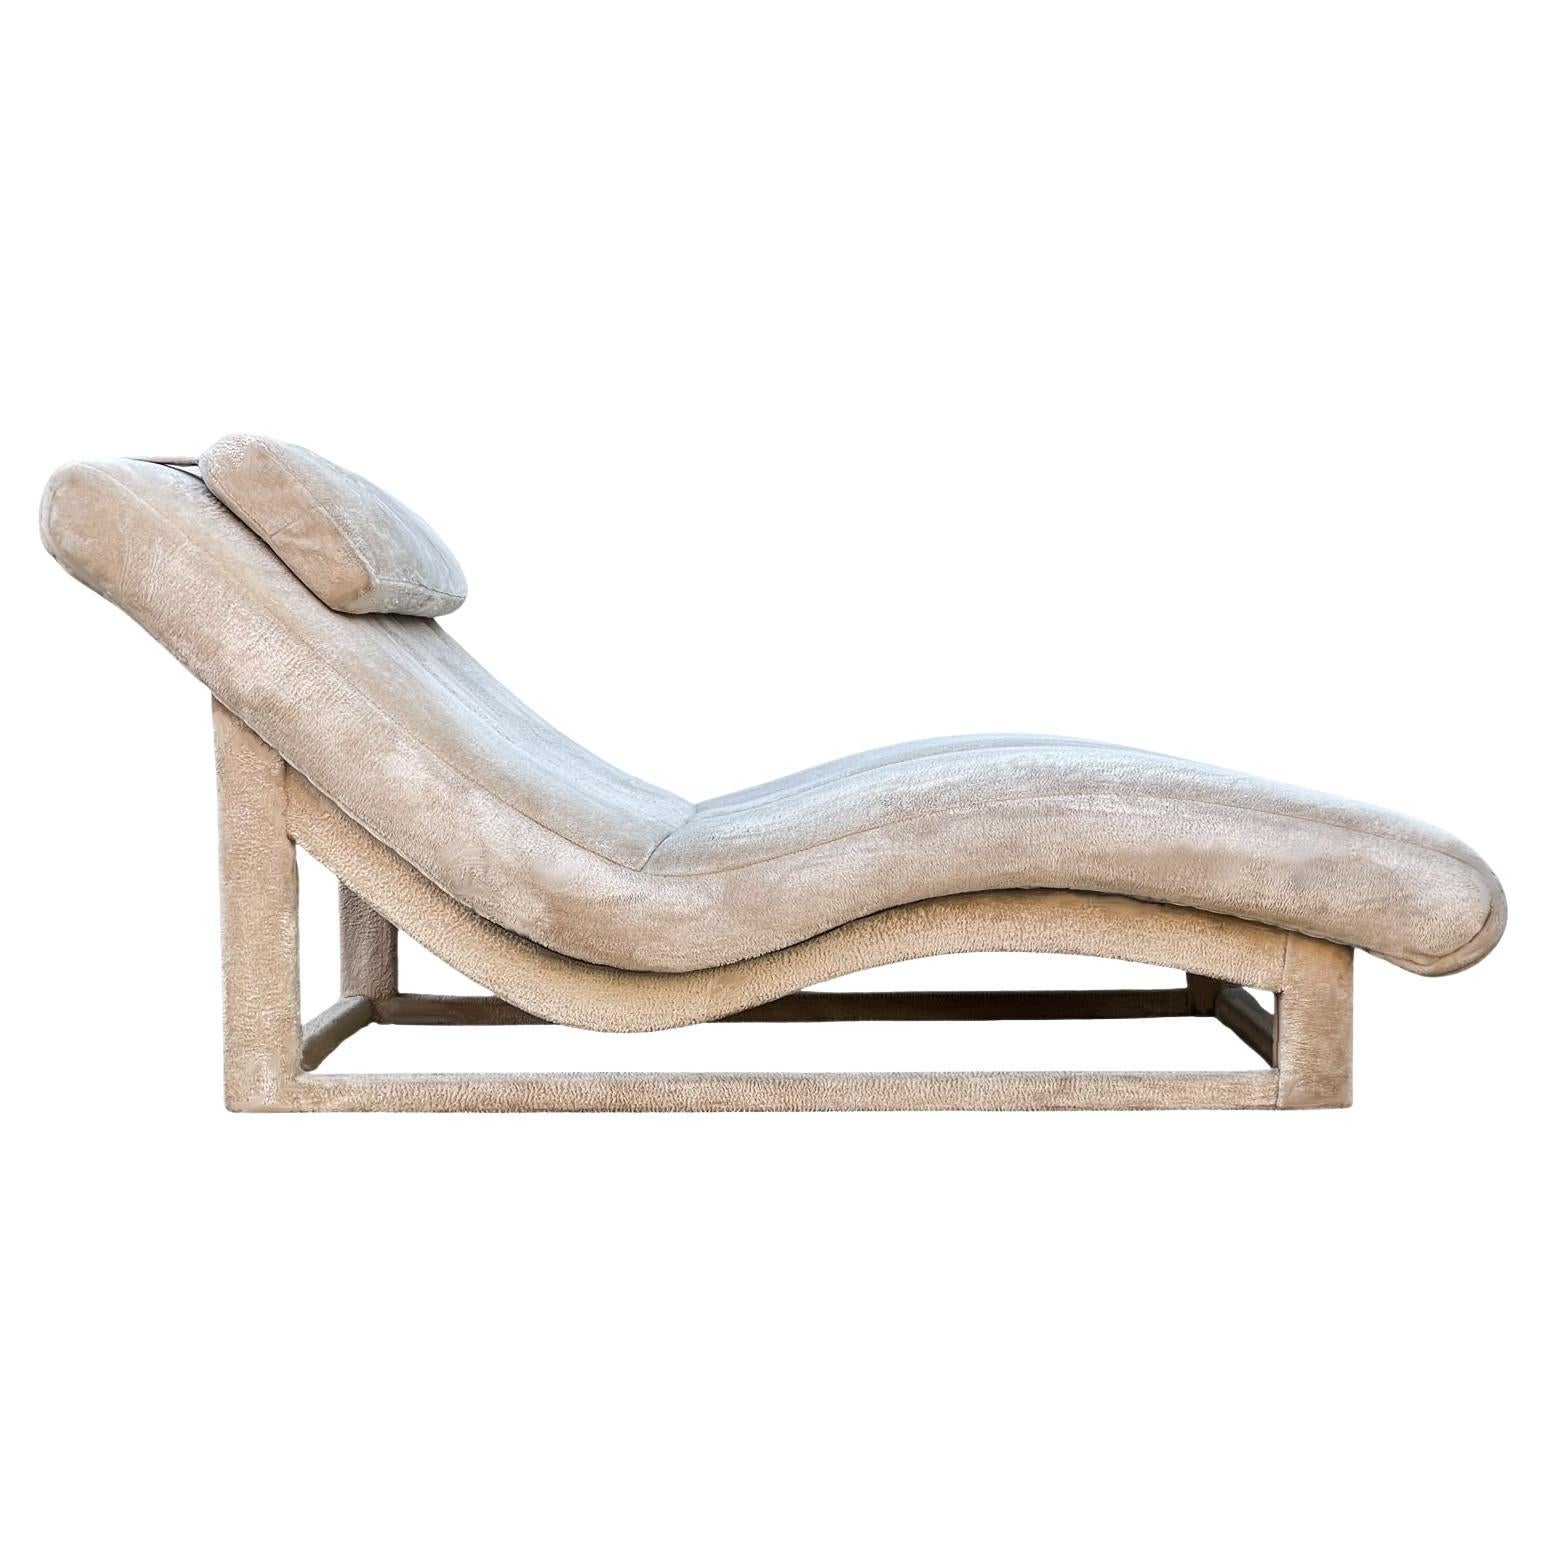 Mid-Century Modern Wide Chaise Lounge Chair in Faux Fur After Milo Baughman